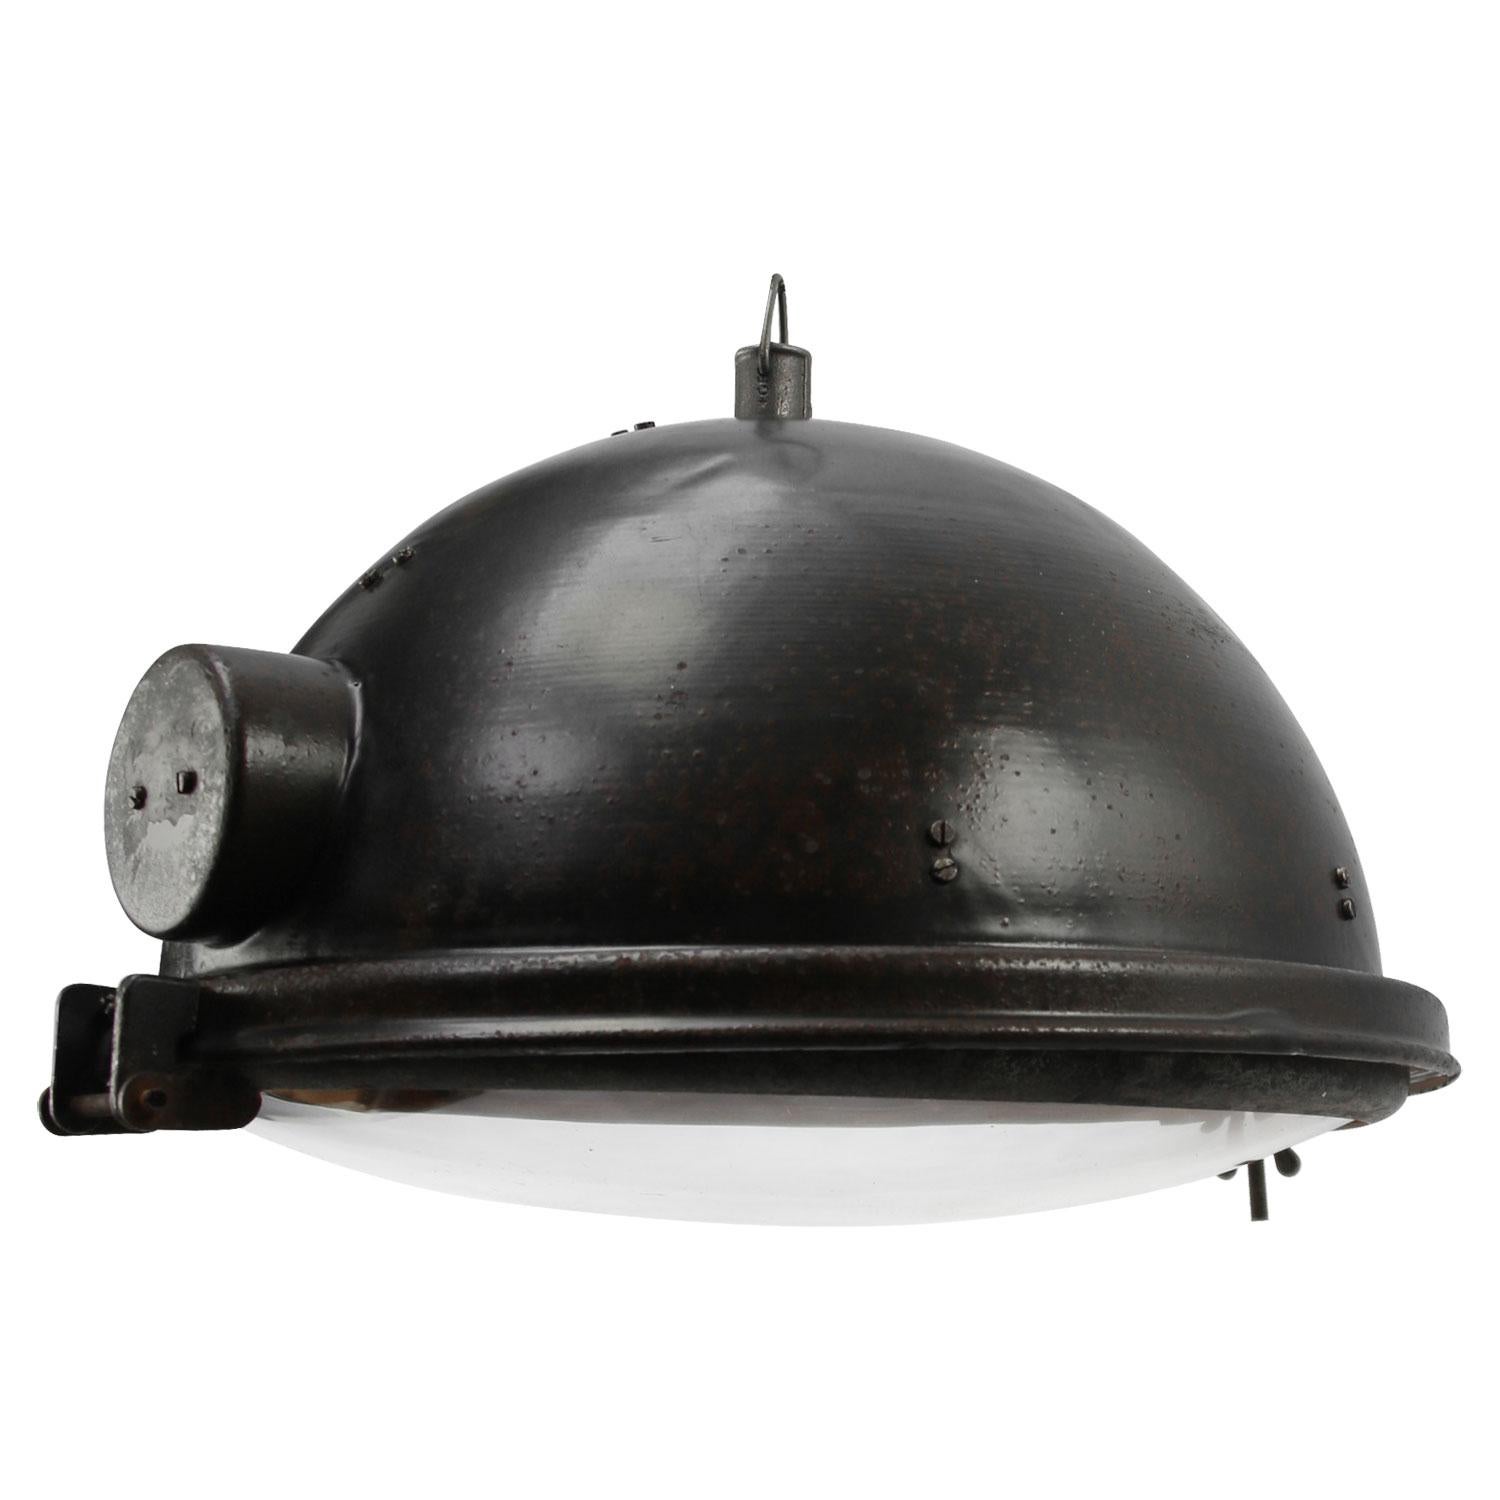 Factory pendant. Black enamel white interior. Cast iron hook.
Clear glass.

Weight: 5.50 kg / 12.1 lb

Priced per individual item. All lamps have been made suitable by international standards for incandescent light bulbs, energy-efficient and